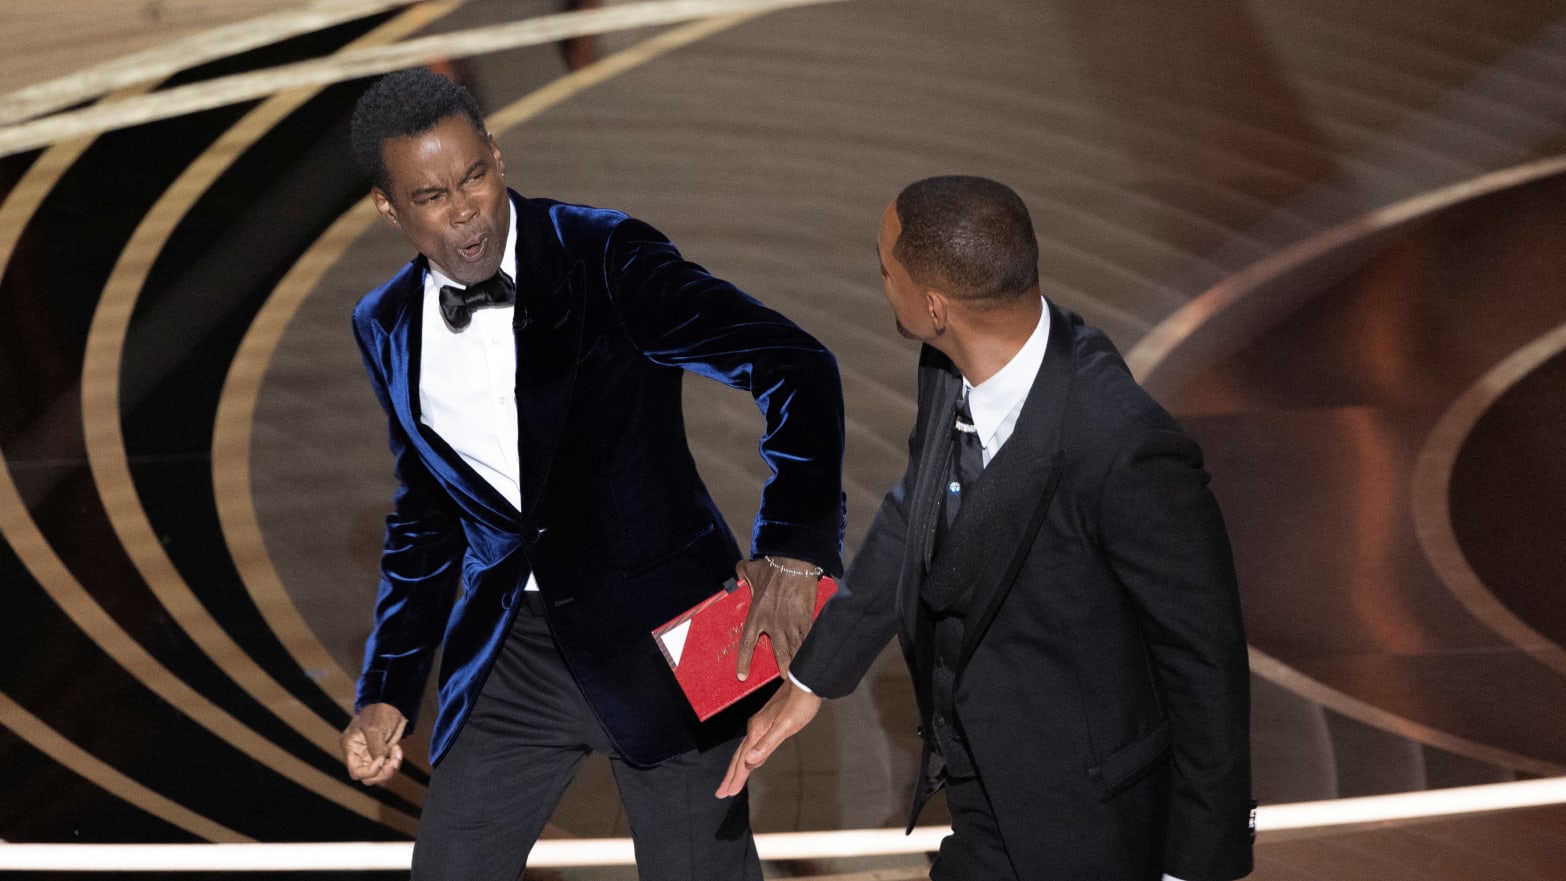 Will Smith Was Asked to Leave Oscars and Refused After Slapping Chris Rock, Academys Board of Governors Says picture